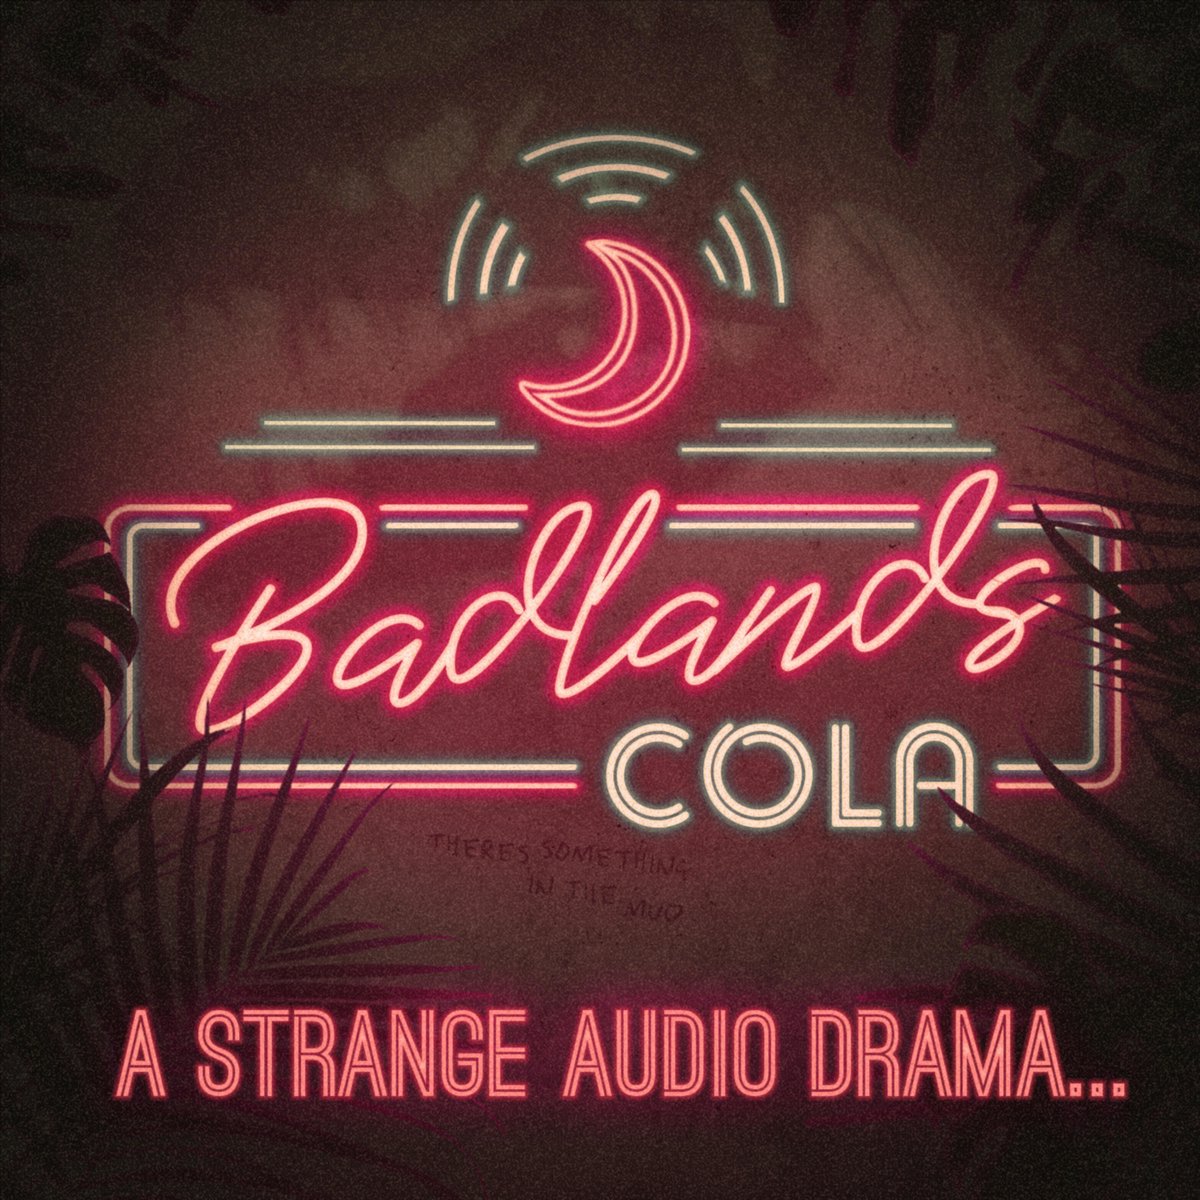 Cover art for Badlands Cola. A pink and white neon sign with the title, a crescent moon emitting radio waves, and the subtitle: "A Strange Audio Drama..."